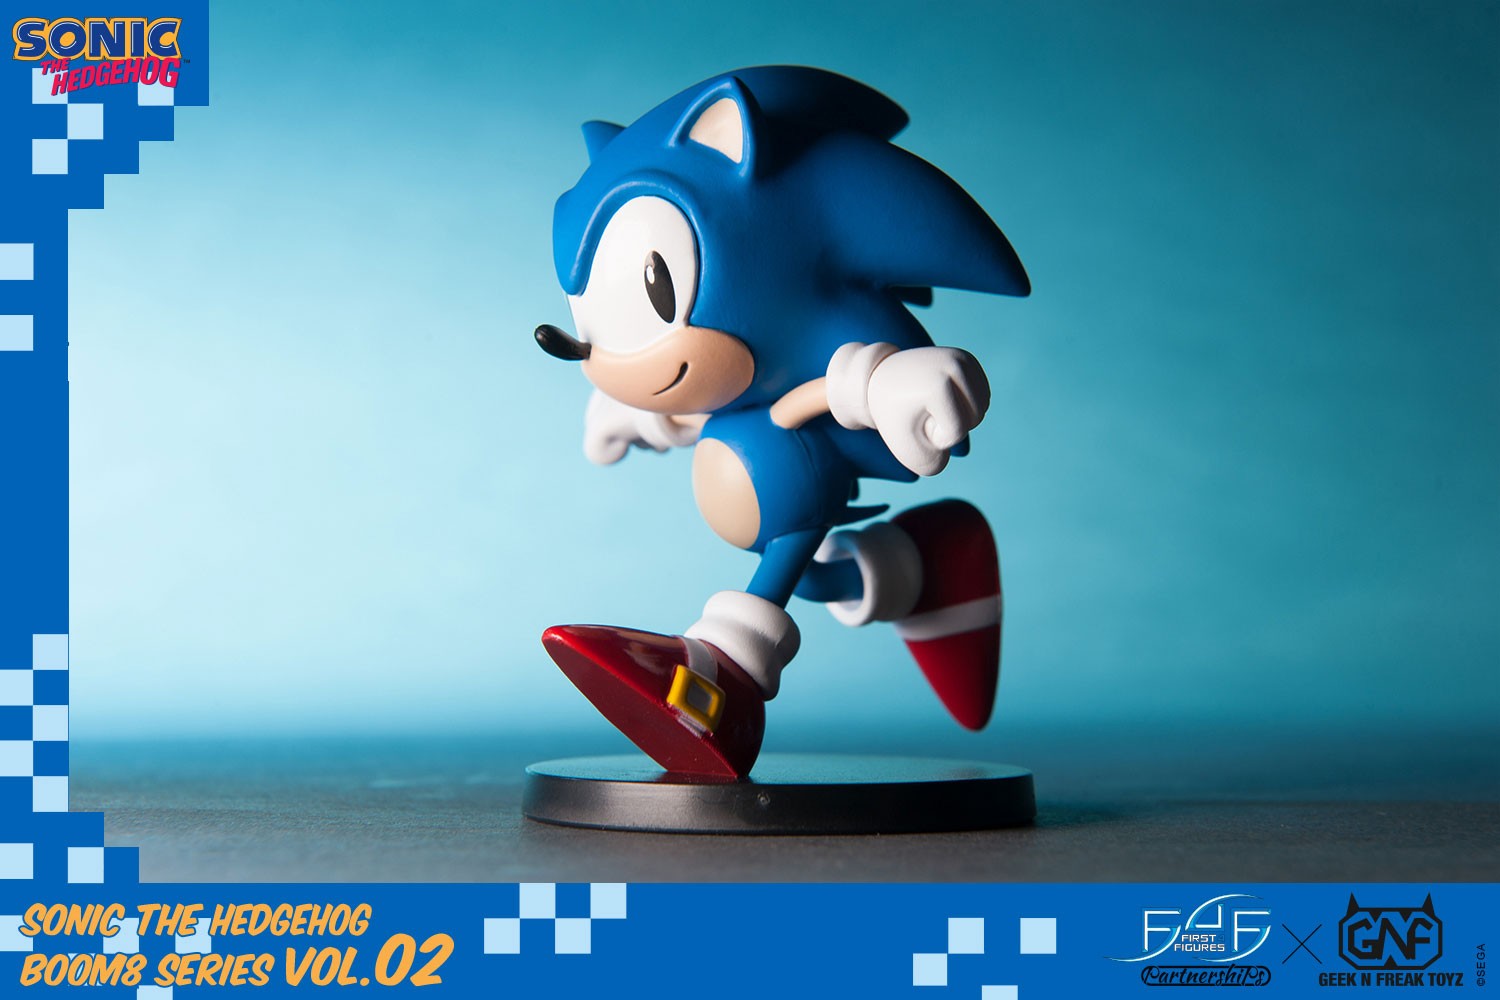 Premium 8 PACK Sonic Classic Collection v2 